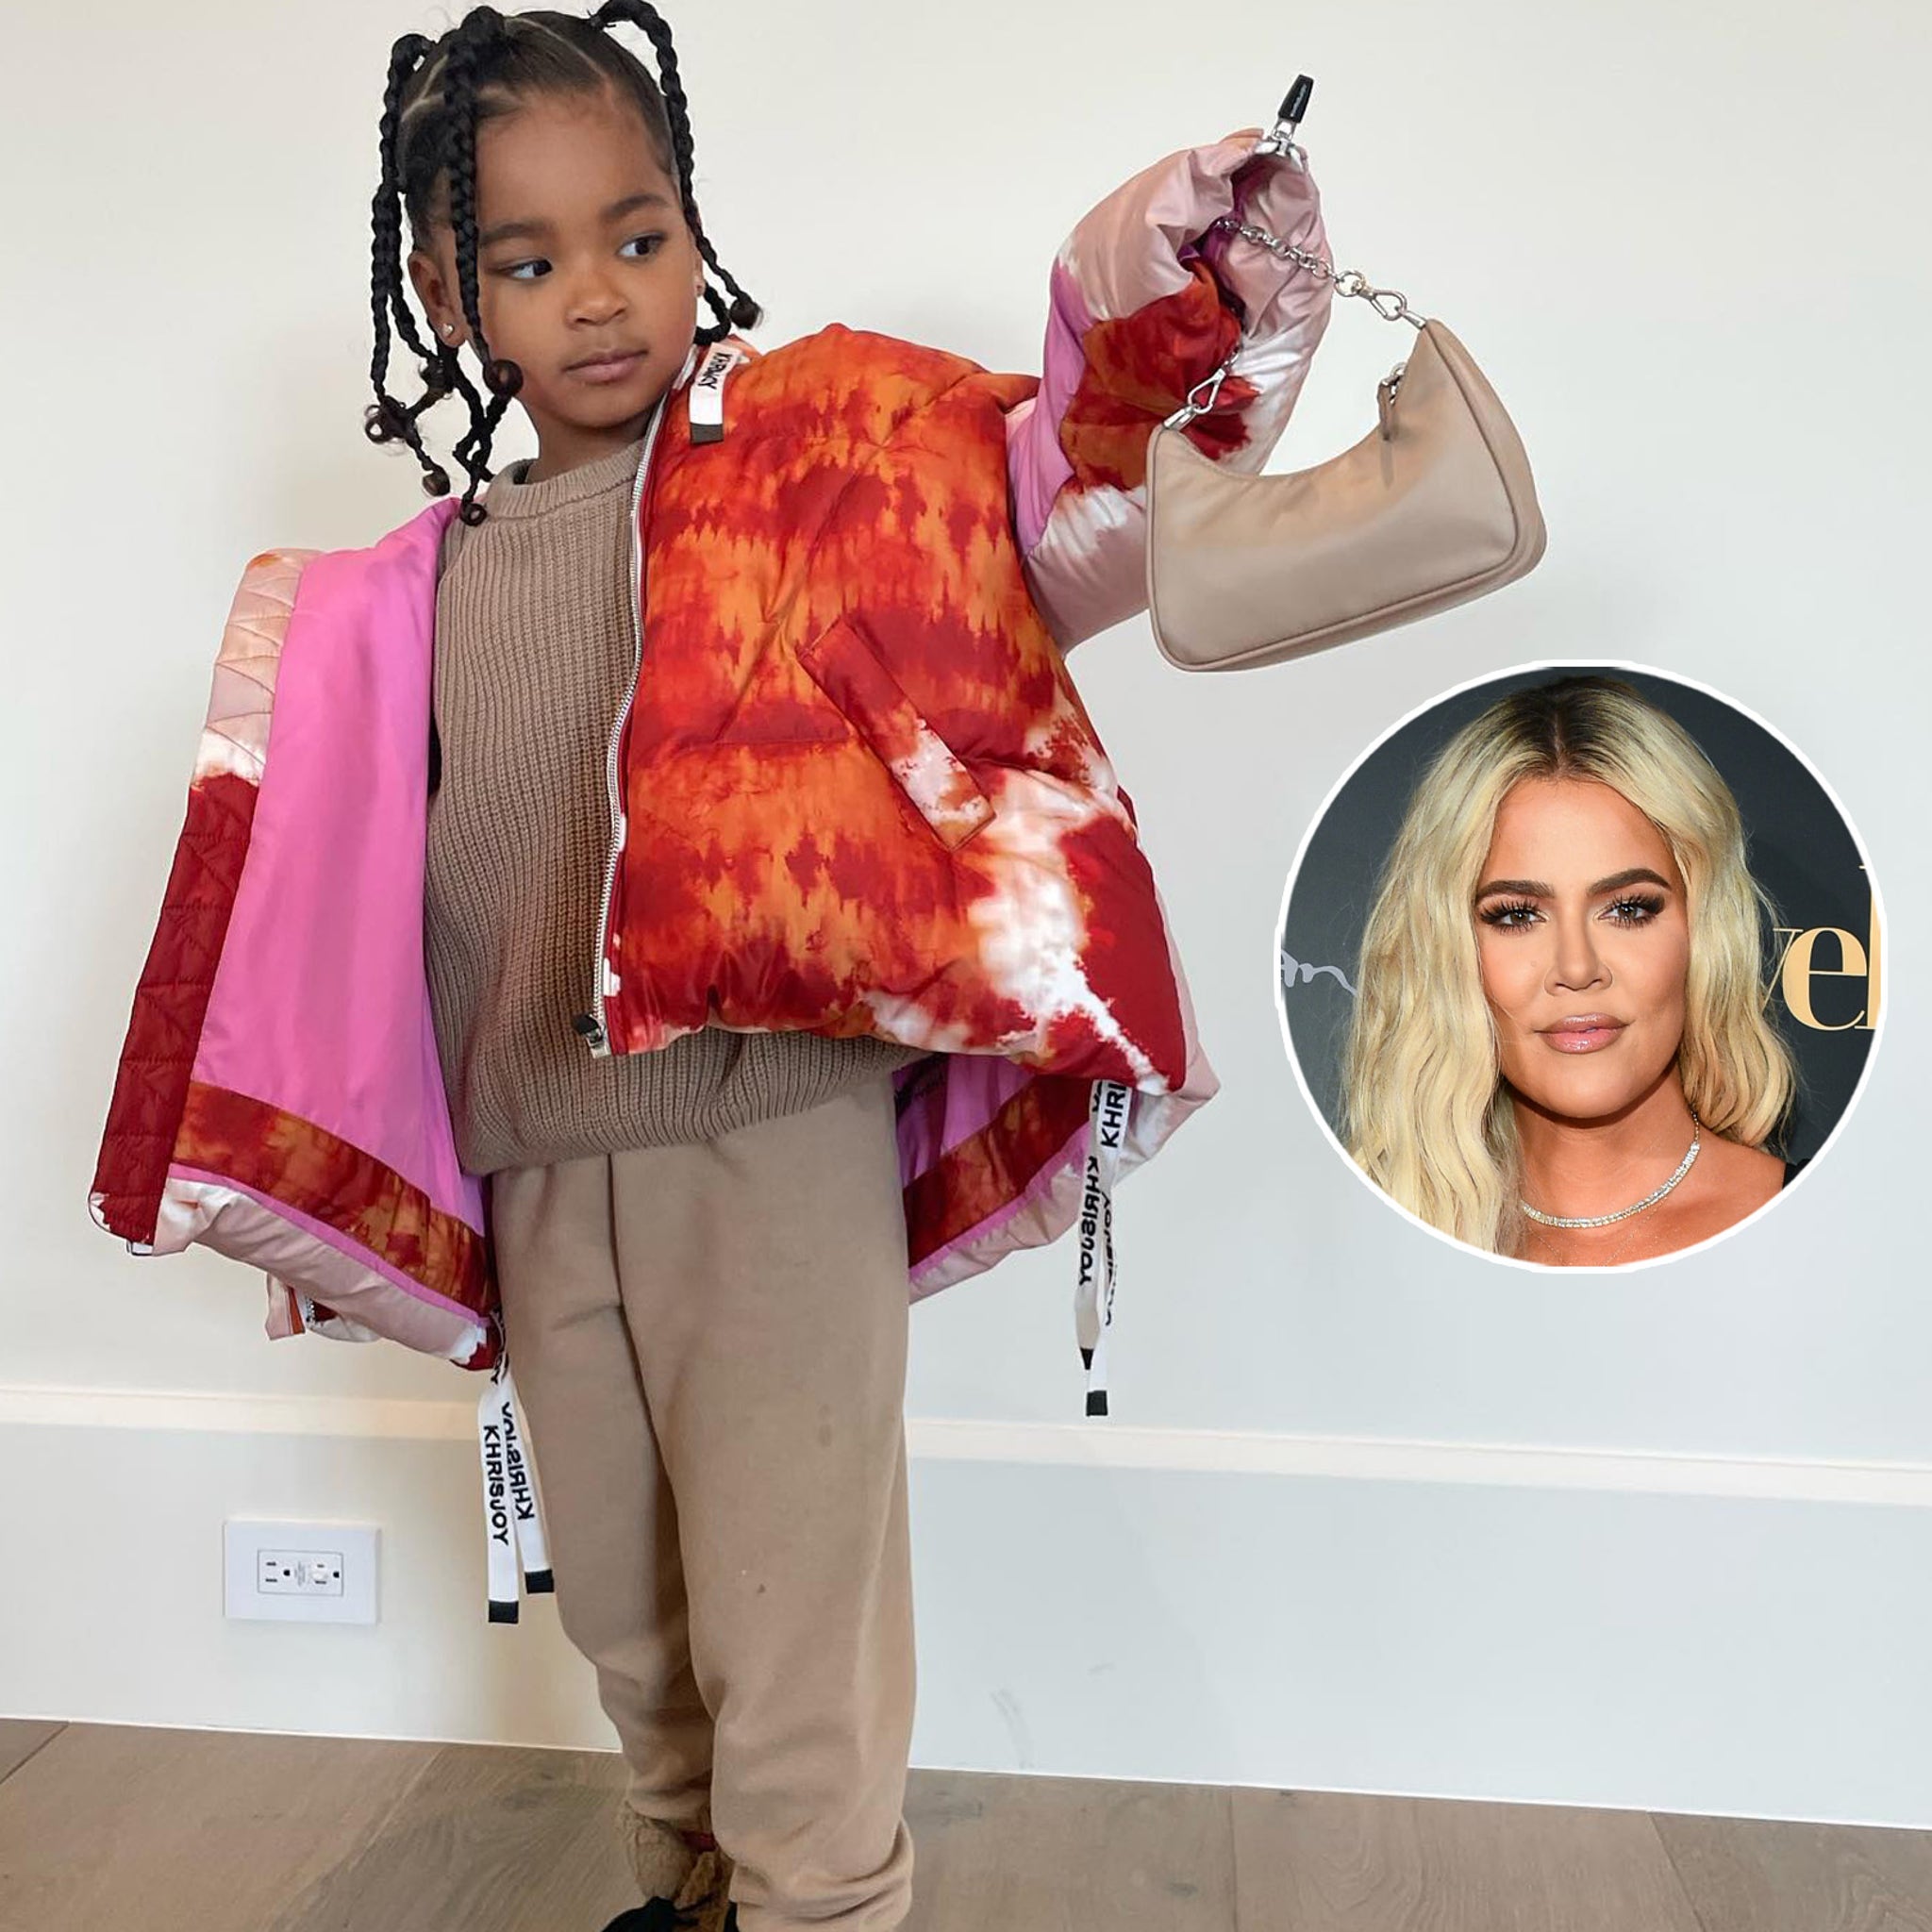 Khloe Kardashian's 3-Year-Old Daughter True Thompson Poses in Expensive  Outfit